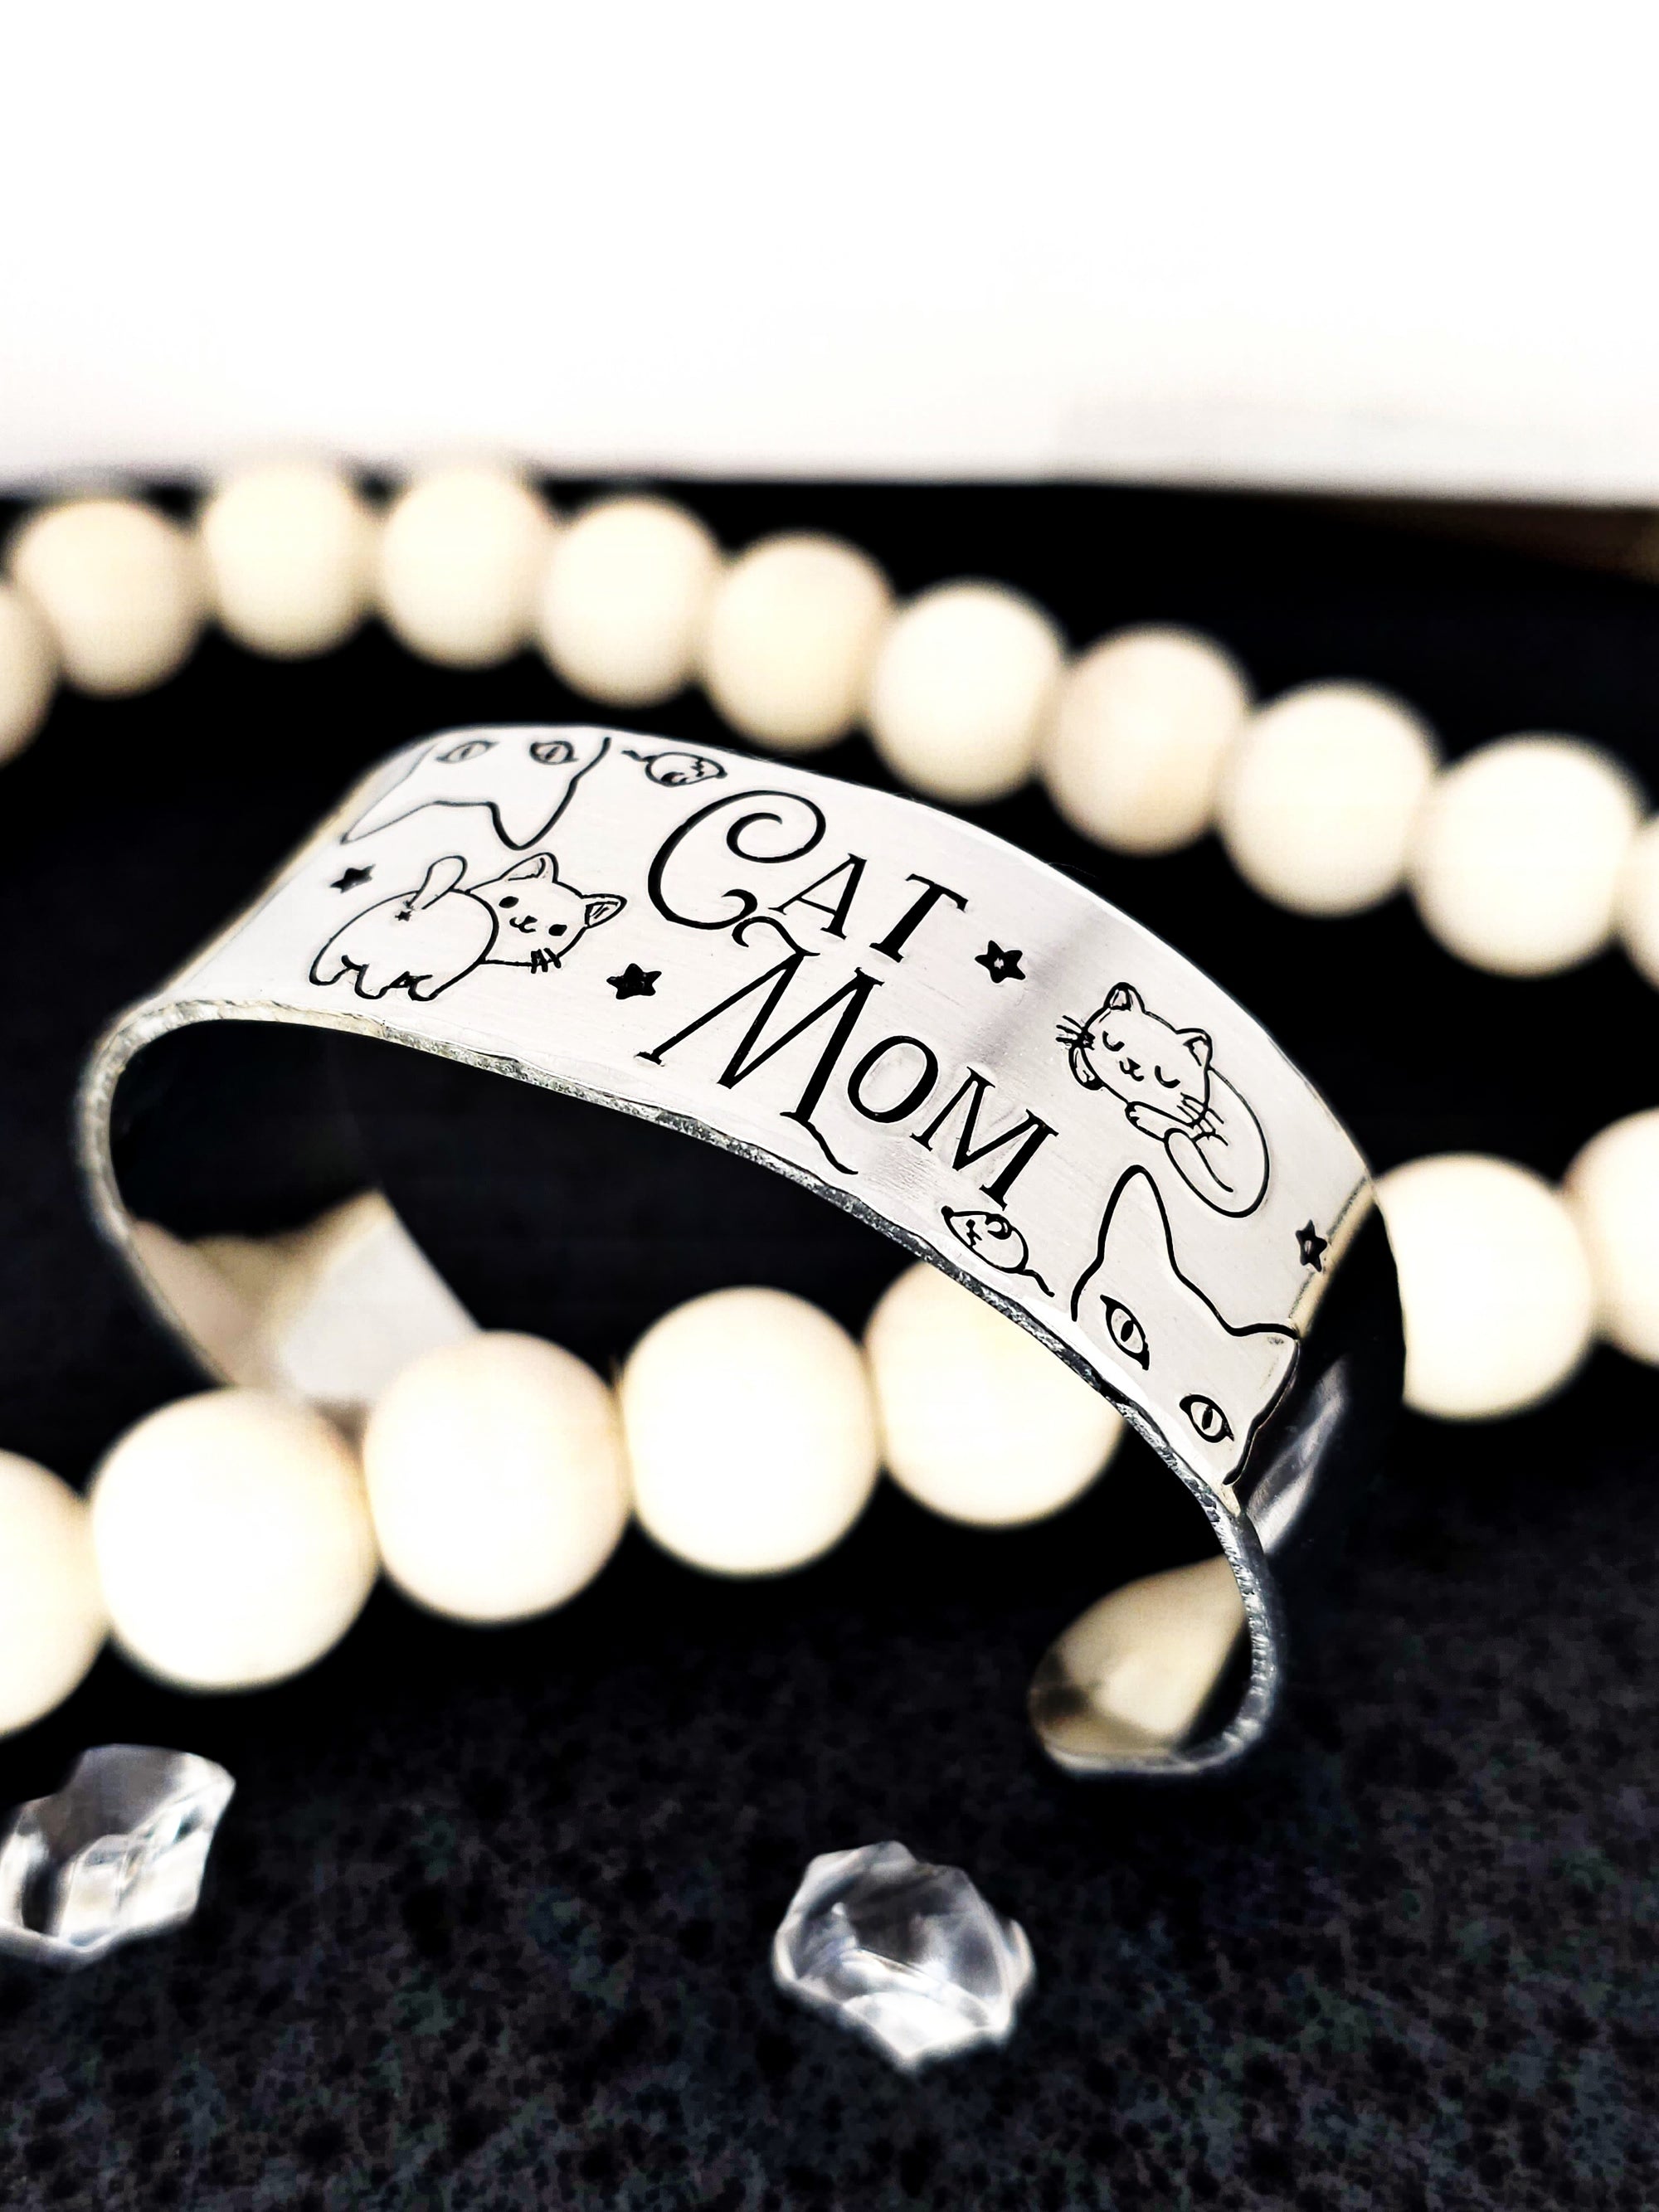 Cat Mom Bracelet Cuff, Crazy Cat Lady, Cat Lover Jewelry, Cat Rescue, Kitty Tag, Cat Name Tag, Thick Bracelet Cuff